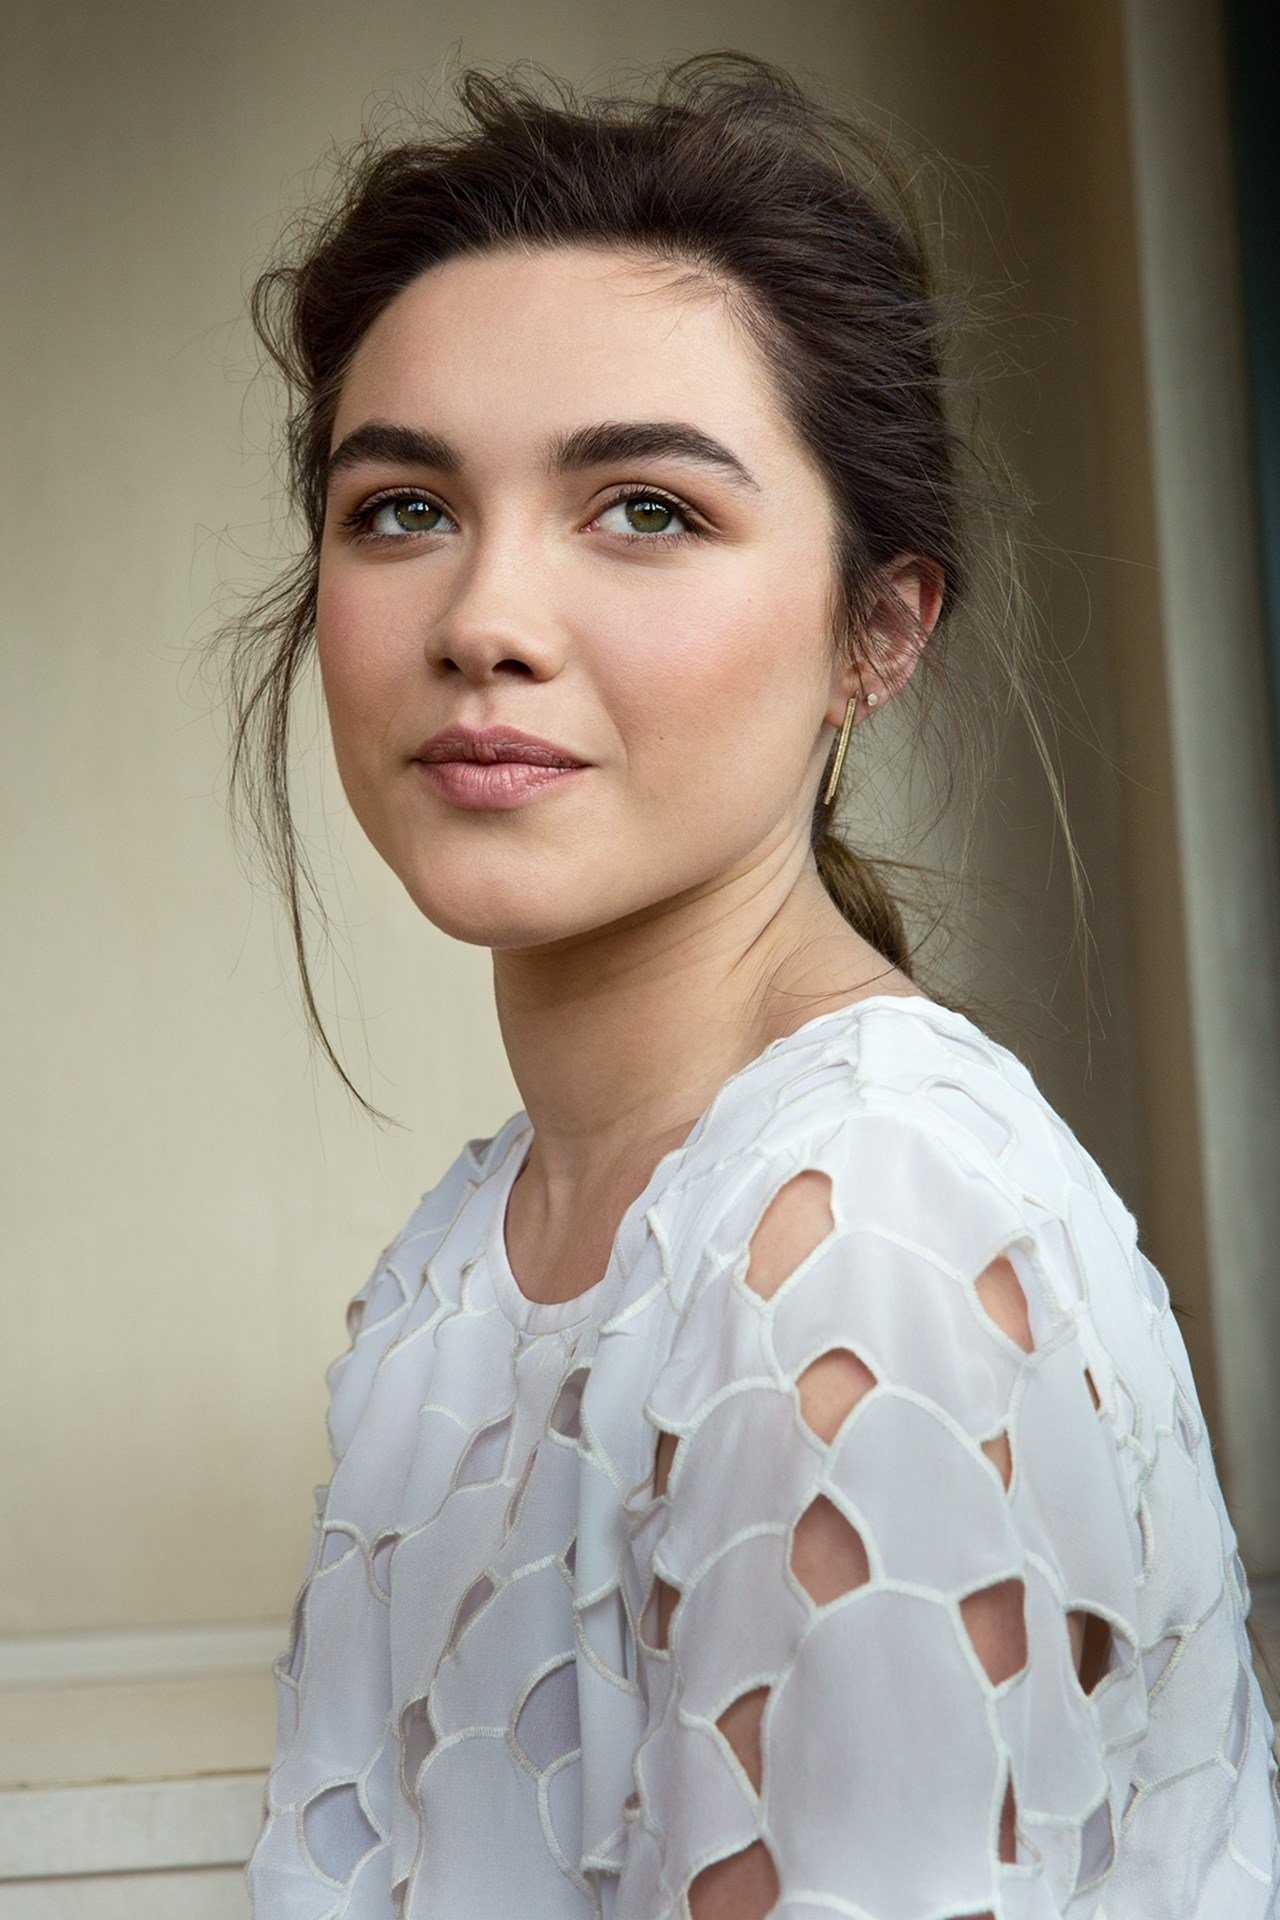 Image of a woman with brown hair and green eyes - Florence Pugh